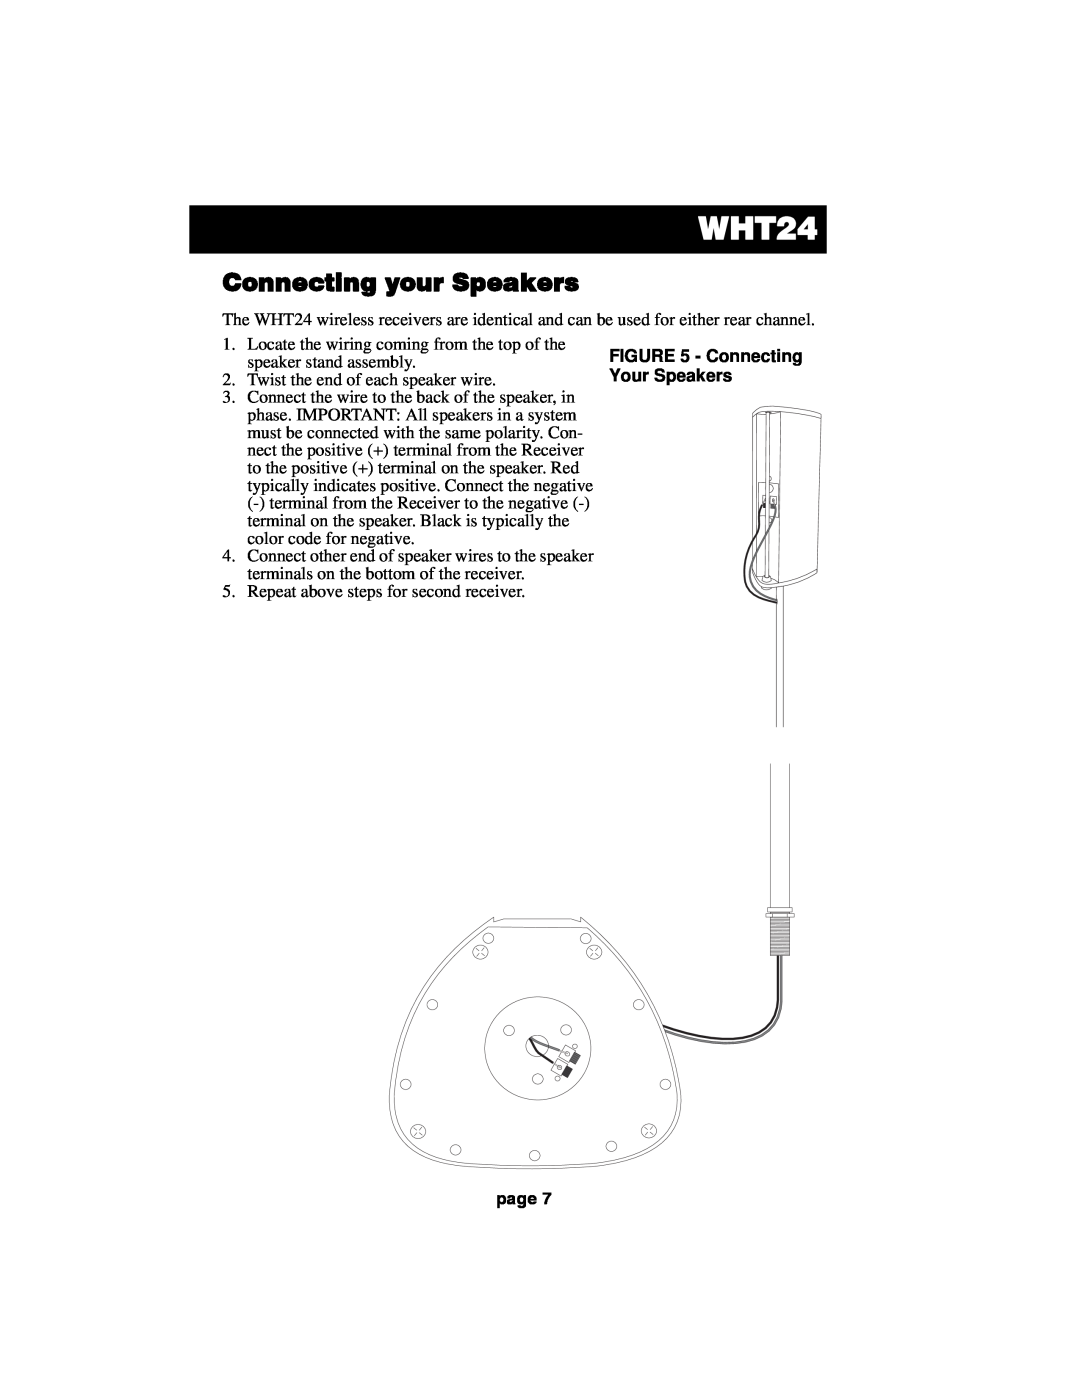 Acoustic Research HT60 operation manual Connecting your Speakers, WHT24, Connecting Your Speakers, page 